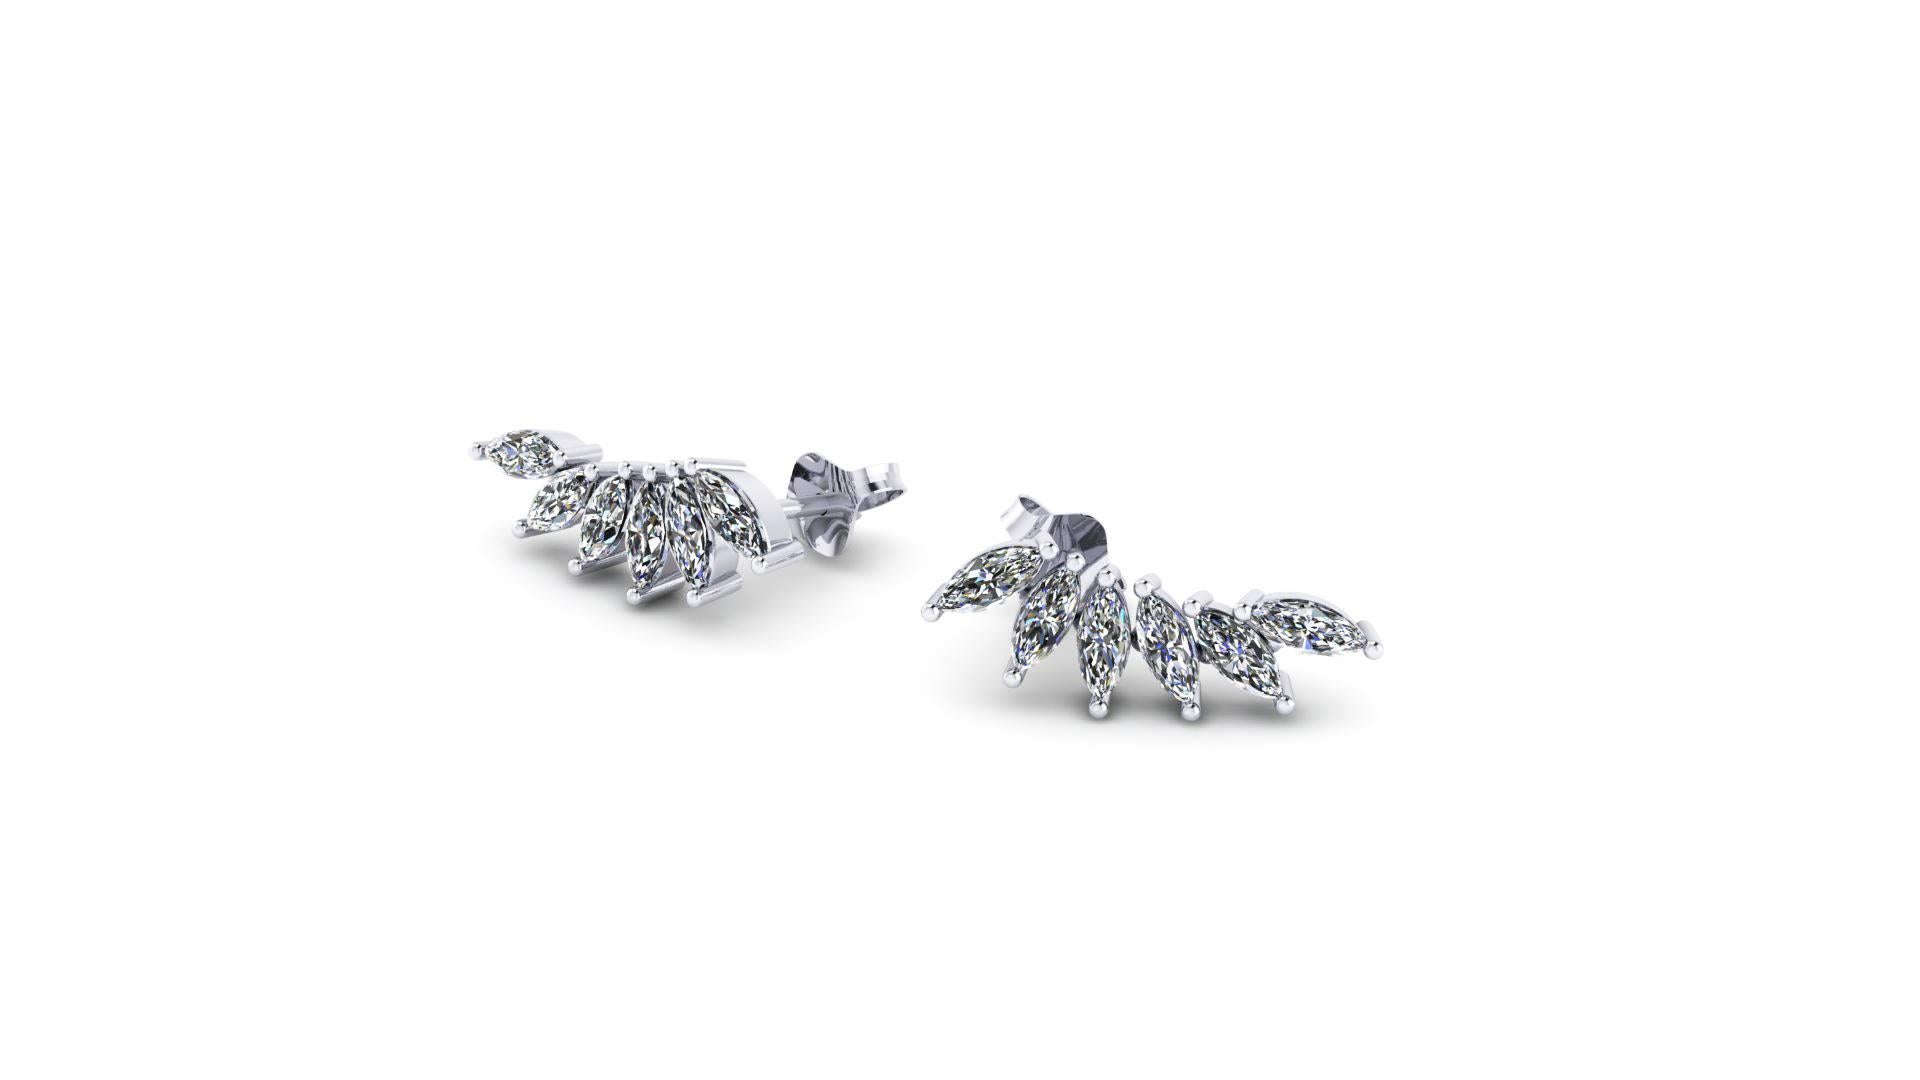 FERRUCCI 1.22 carats Marquise shape Diamonds wing earrings made in 18k white gold in New York City by Italian master jeweler, modern fashion look for every sophisticated woman of every age, pret-a-porter, easy to wear from office to evening out.